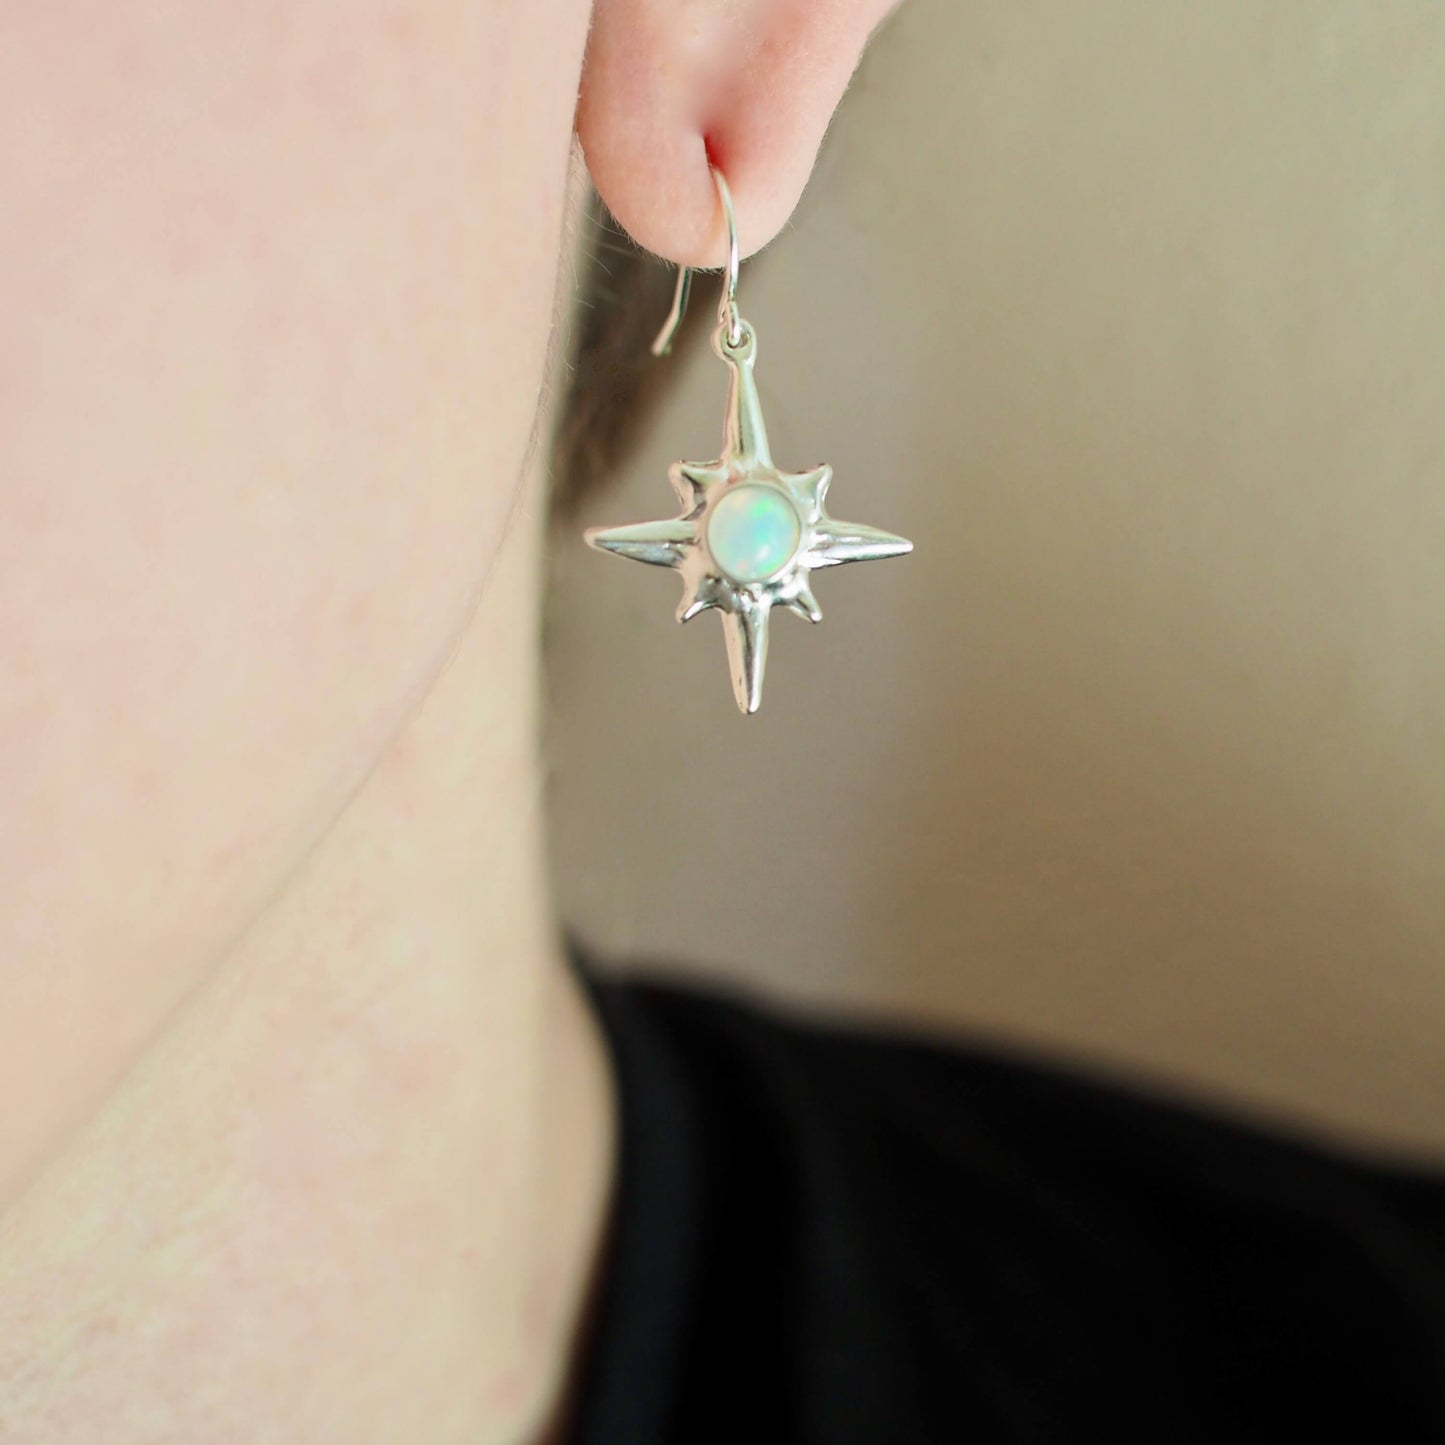 North Star earrings set with sustainably sourced opal artisan made jewelry by Iron Oxide Designs, shown on a model for scale